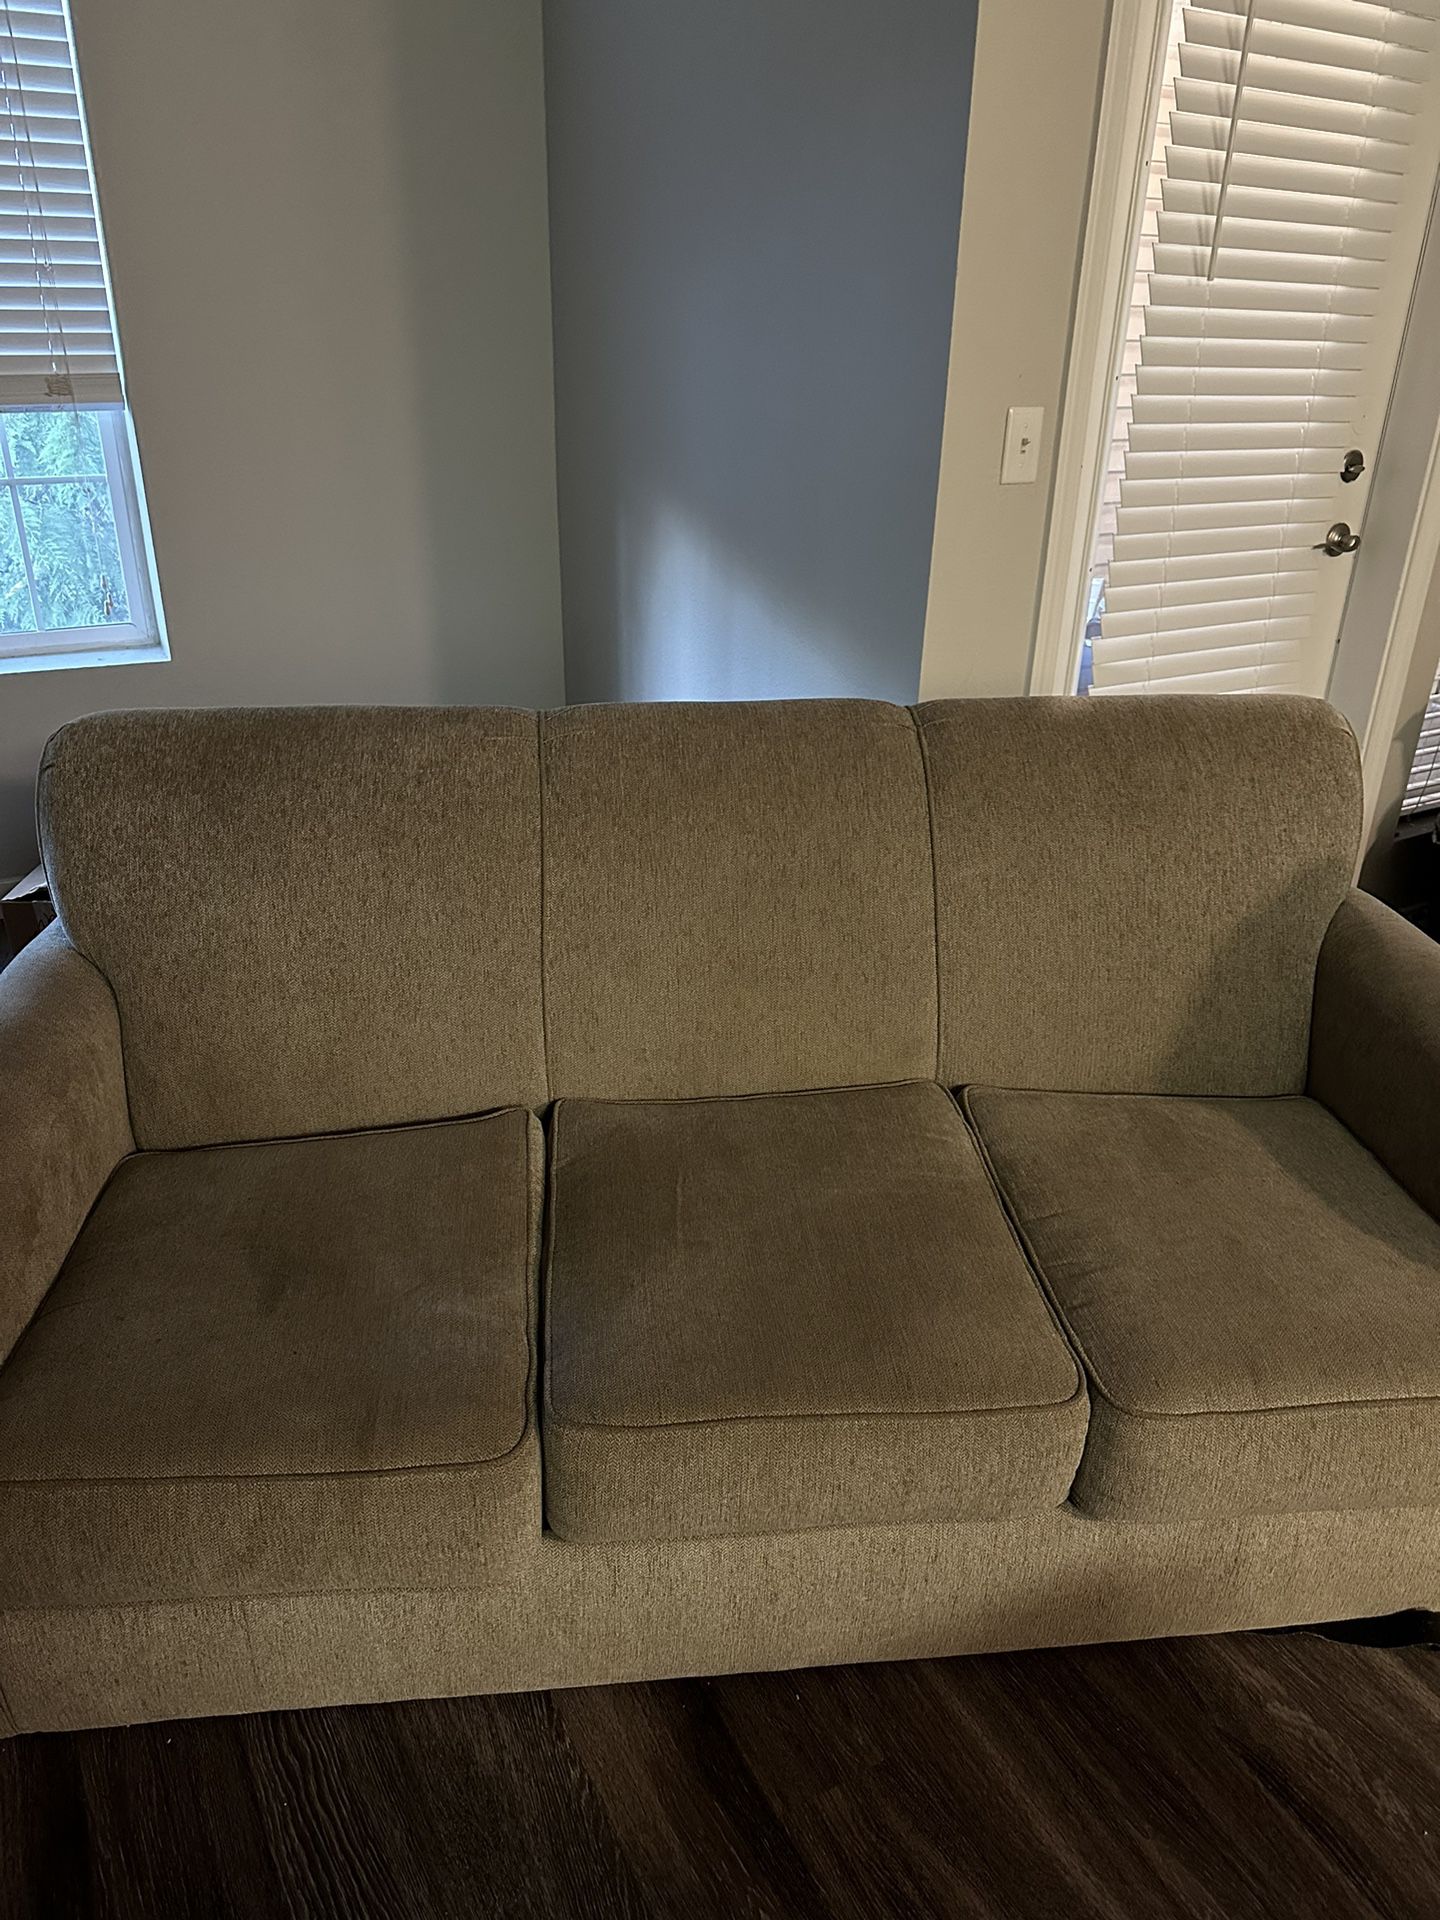 Sofa Bed/Pull Out Couch